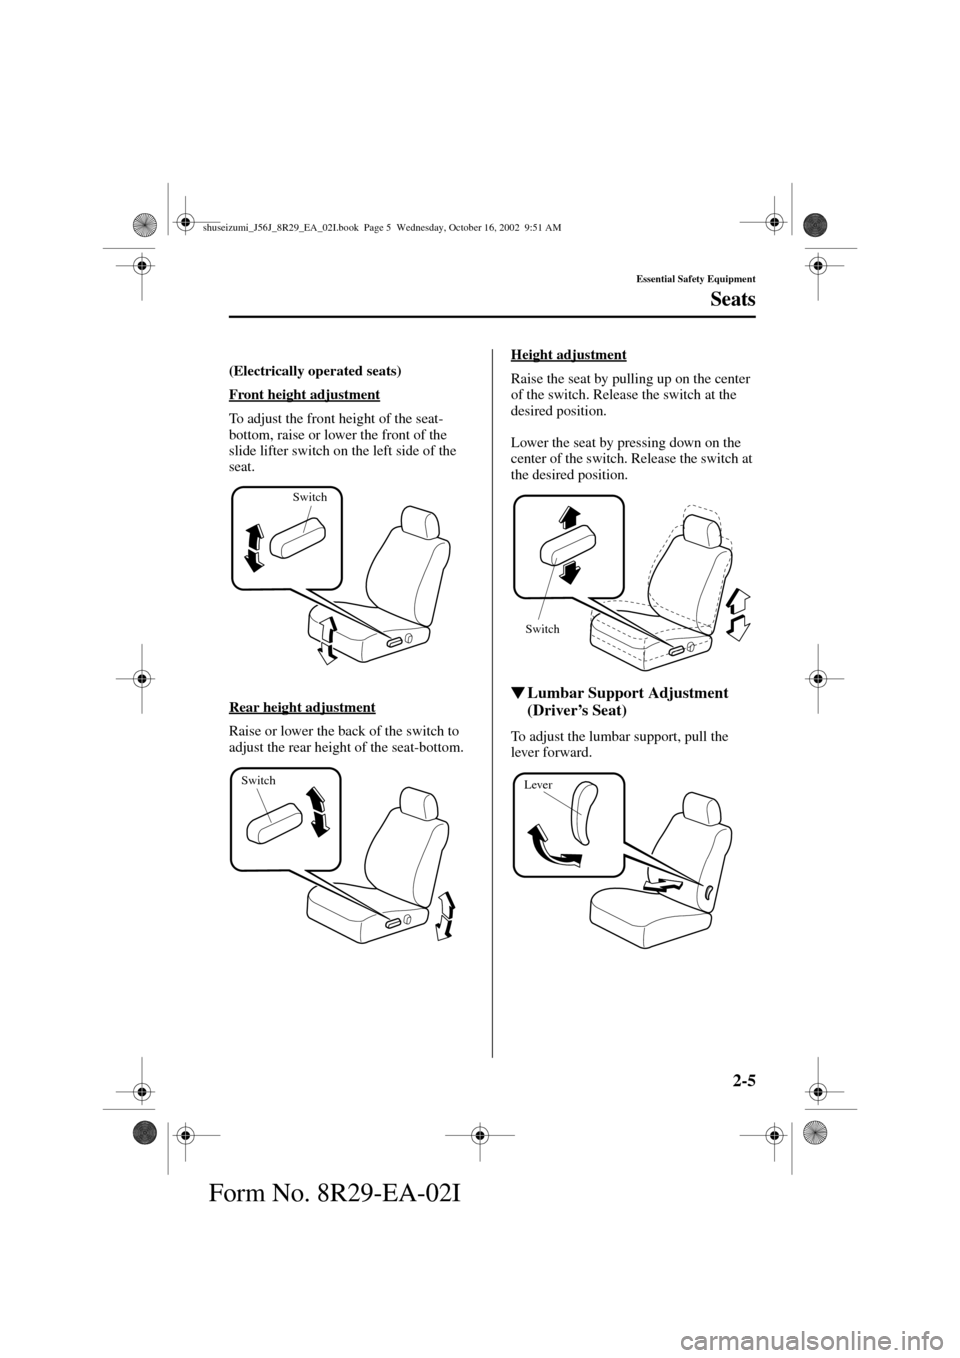 MAZDA MODEL 6 2003   (in English) User Guide 2-5
Essential Safety Equipment
Seats
Form No. 8R29-EA-02I
(Electrically operated seats)
 
Front height adjustment
To adjust the front height of the seat-
bottom, raise or lower the front of the 
slide